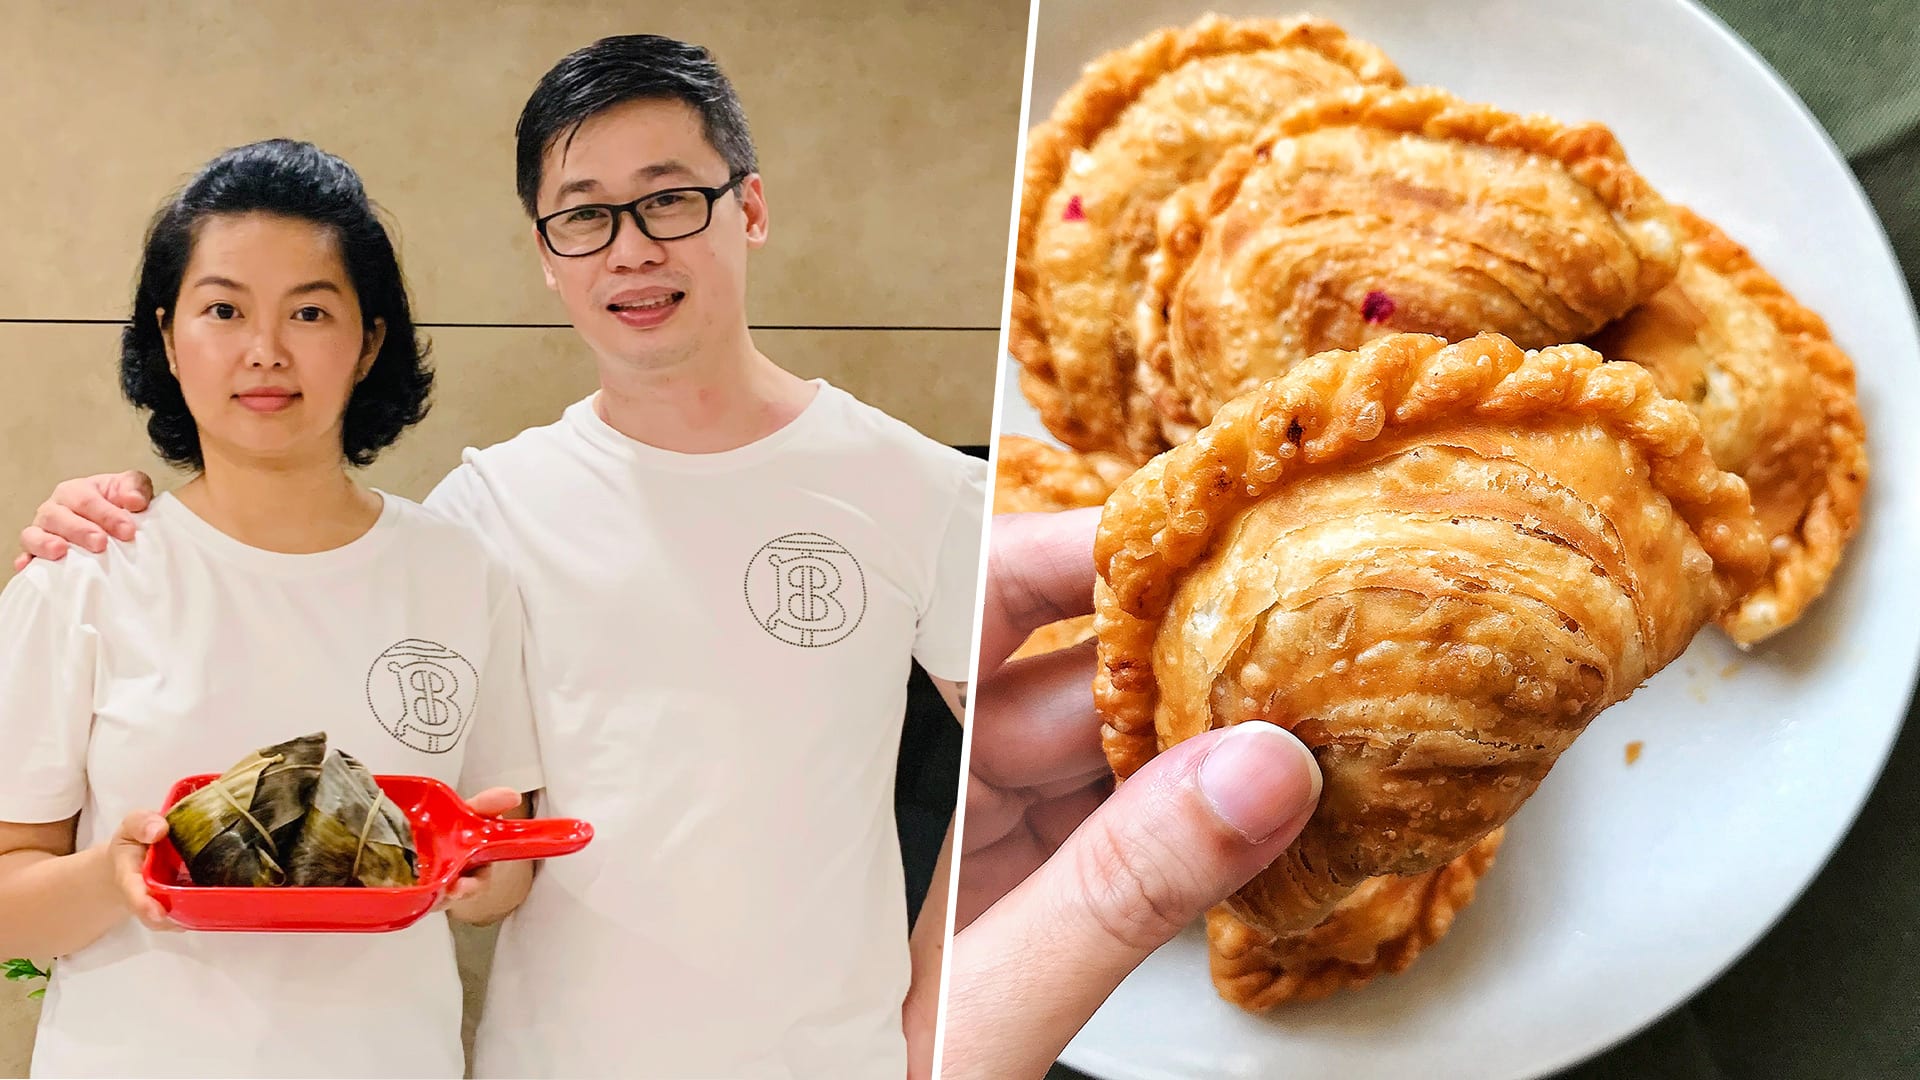 Hotel Pastry Cook-Turned-Personal Trainer Now Sells Tasty Curry Puffs From Home